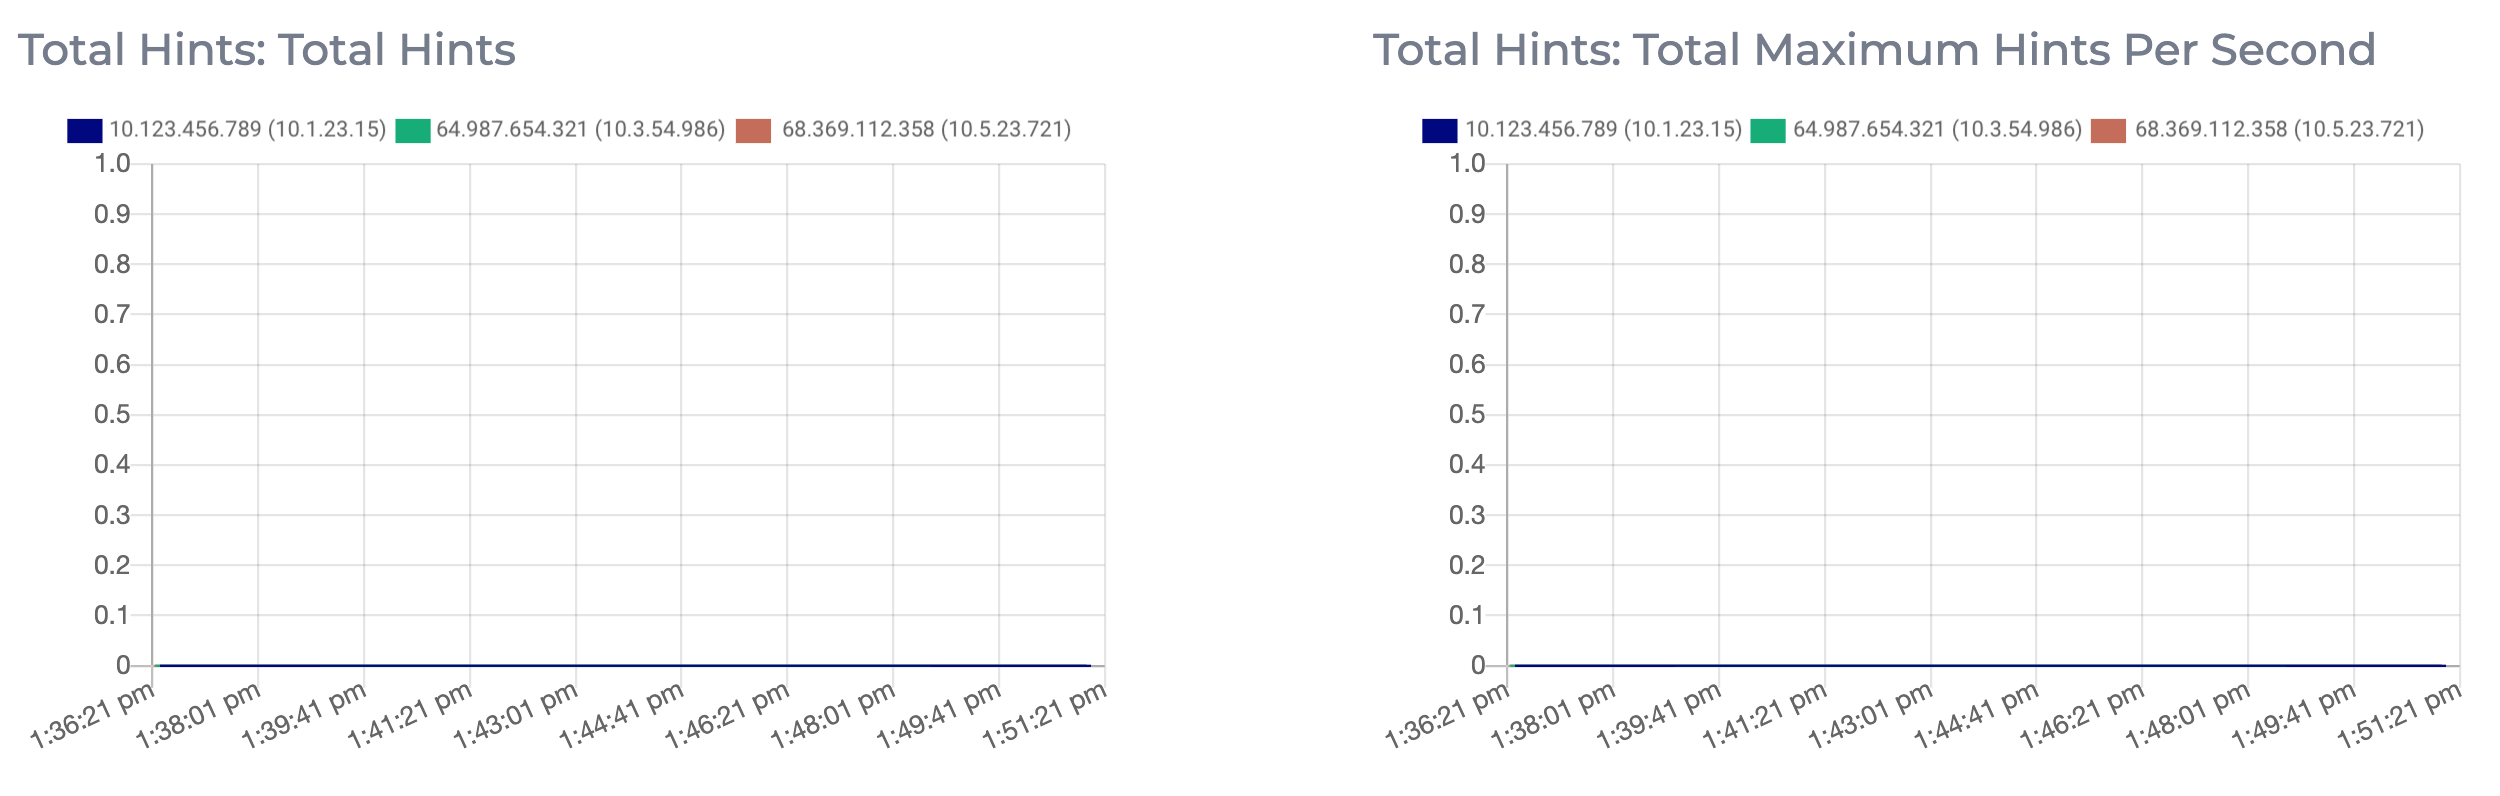 Graphs showing the titak hunts and the total maximum hints per second for the Apache Cassandra cluster.